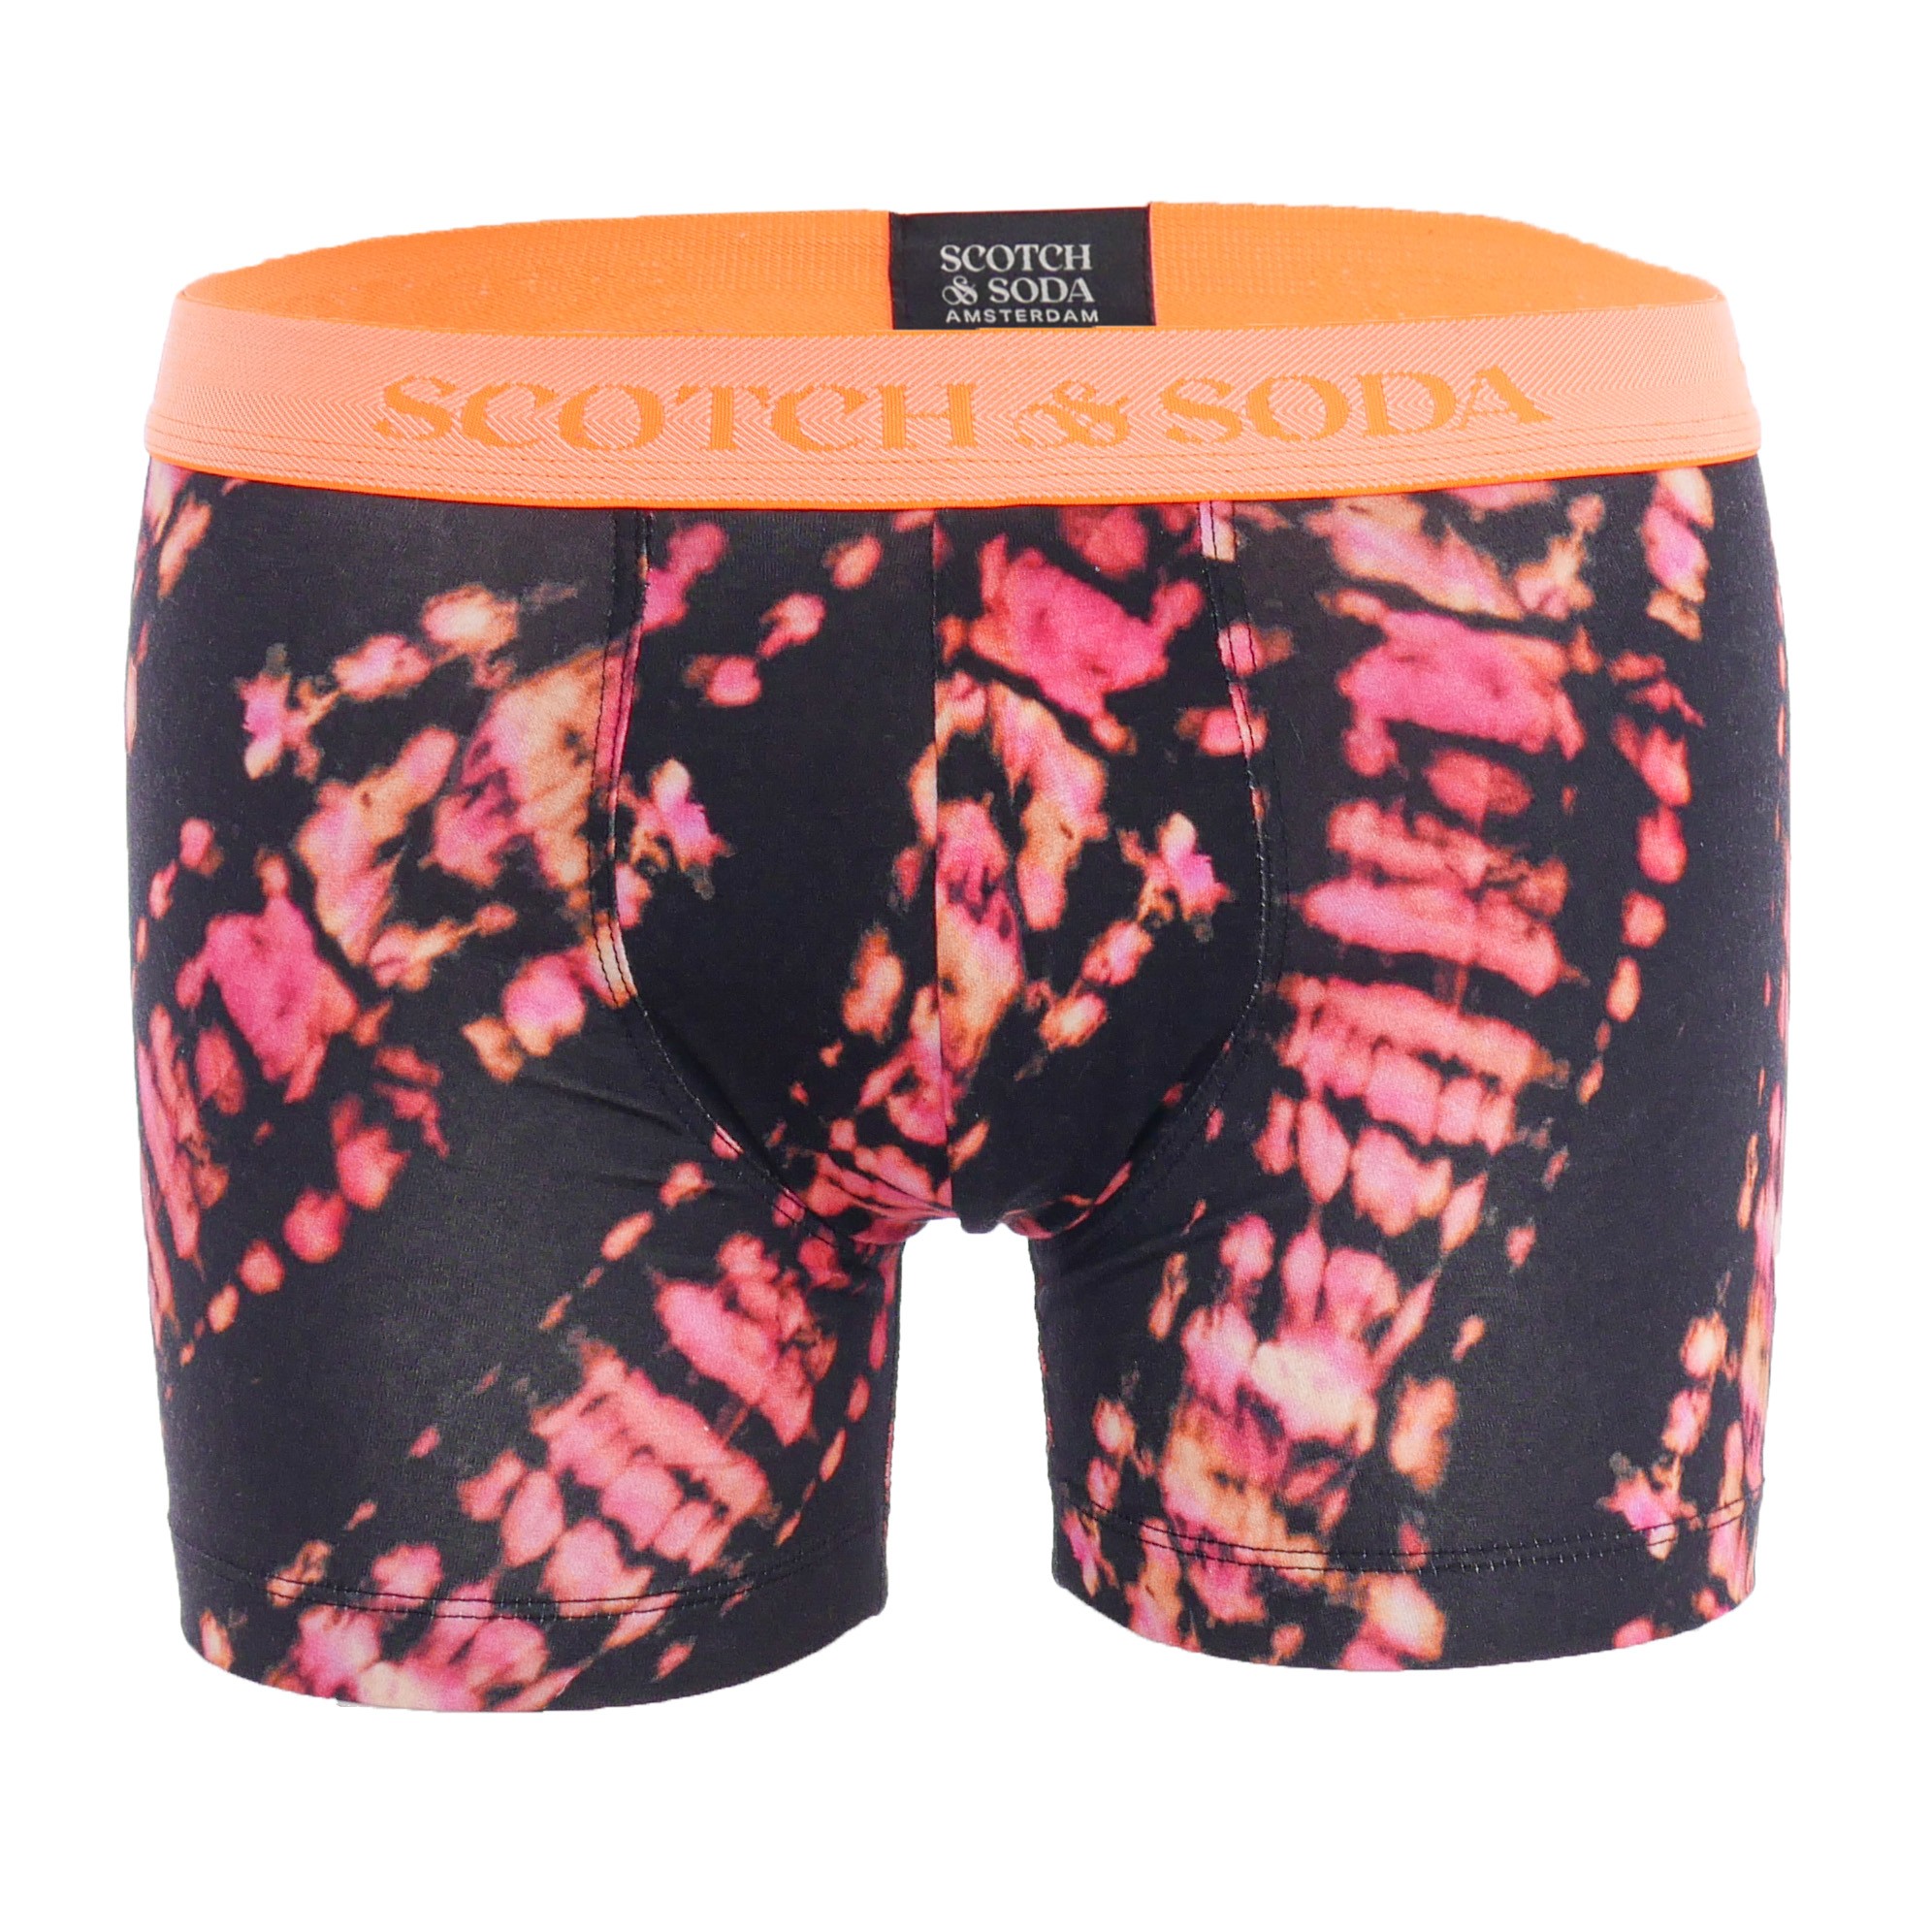 Pack of 2 Scotch&Soda Boxers with neon belt in organic cotton - Bla